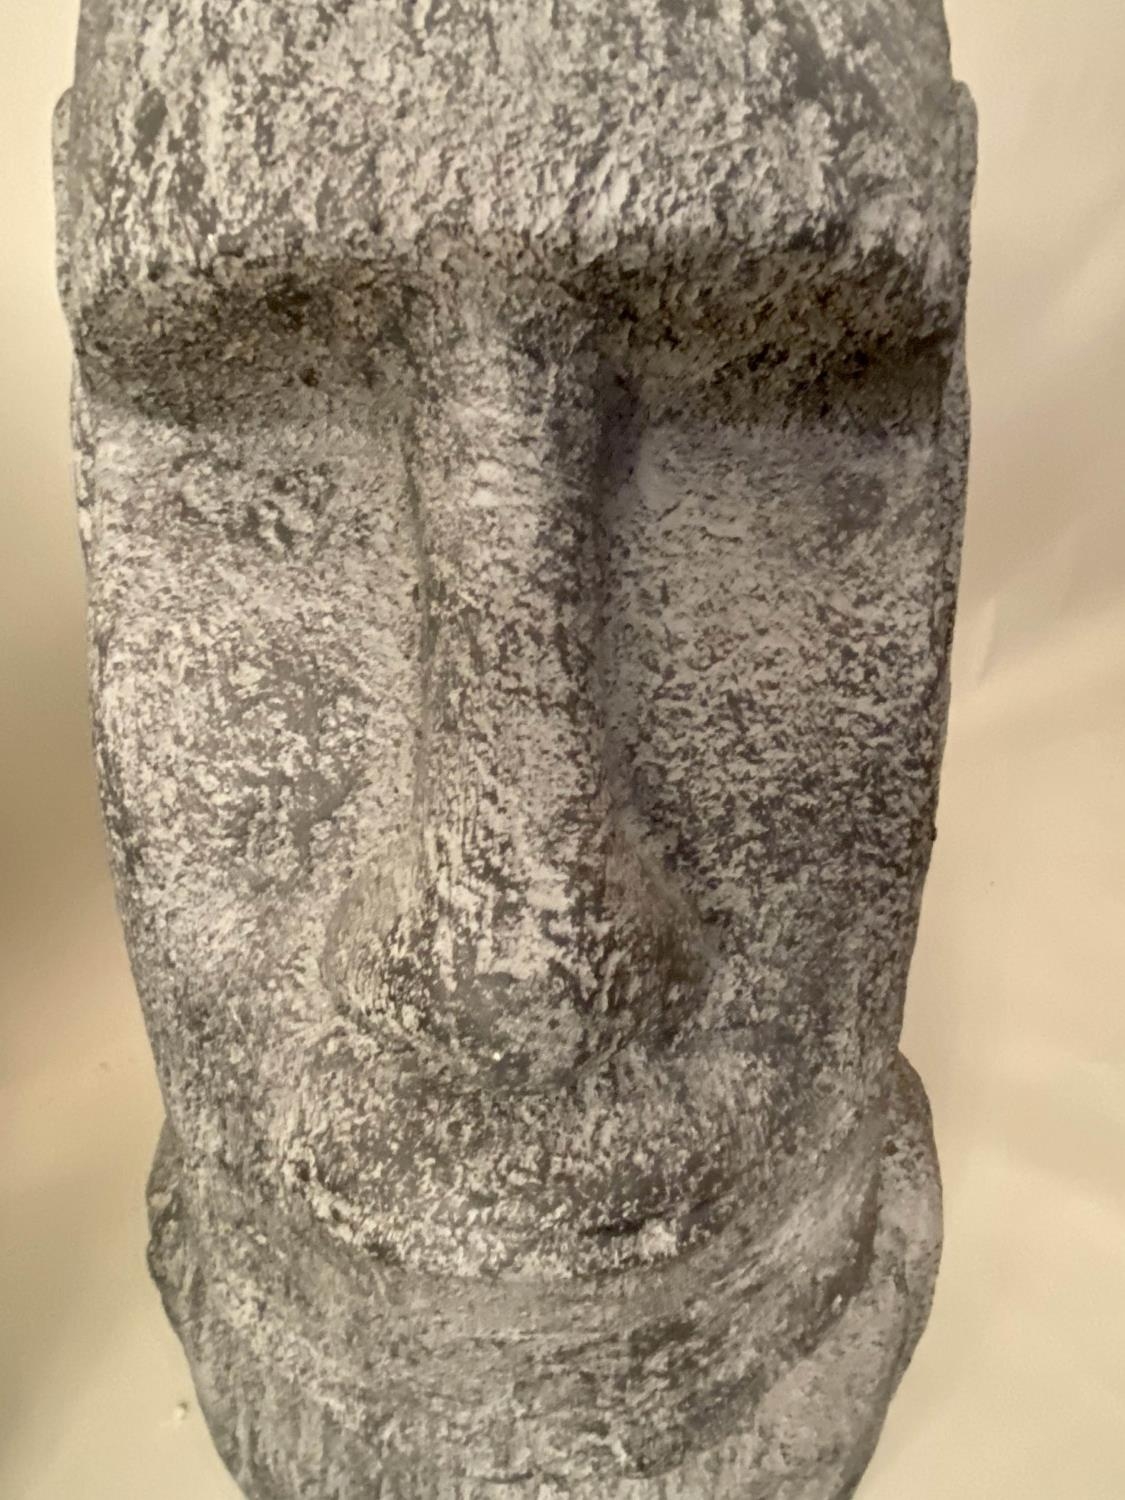 RAPA NUI STYLE BUSTS, a pair, 61cm x 38cm (2). - Image 3 of 4